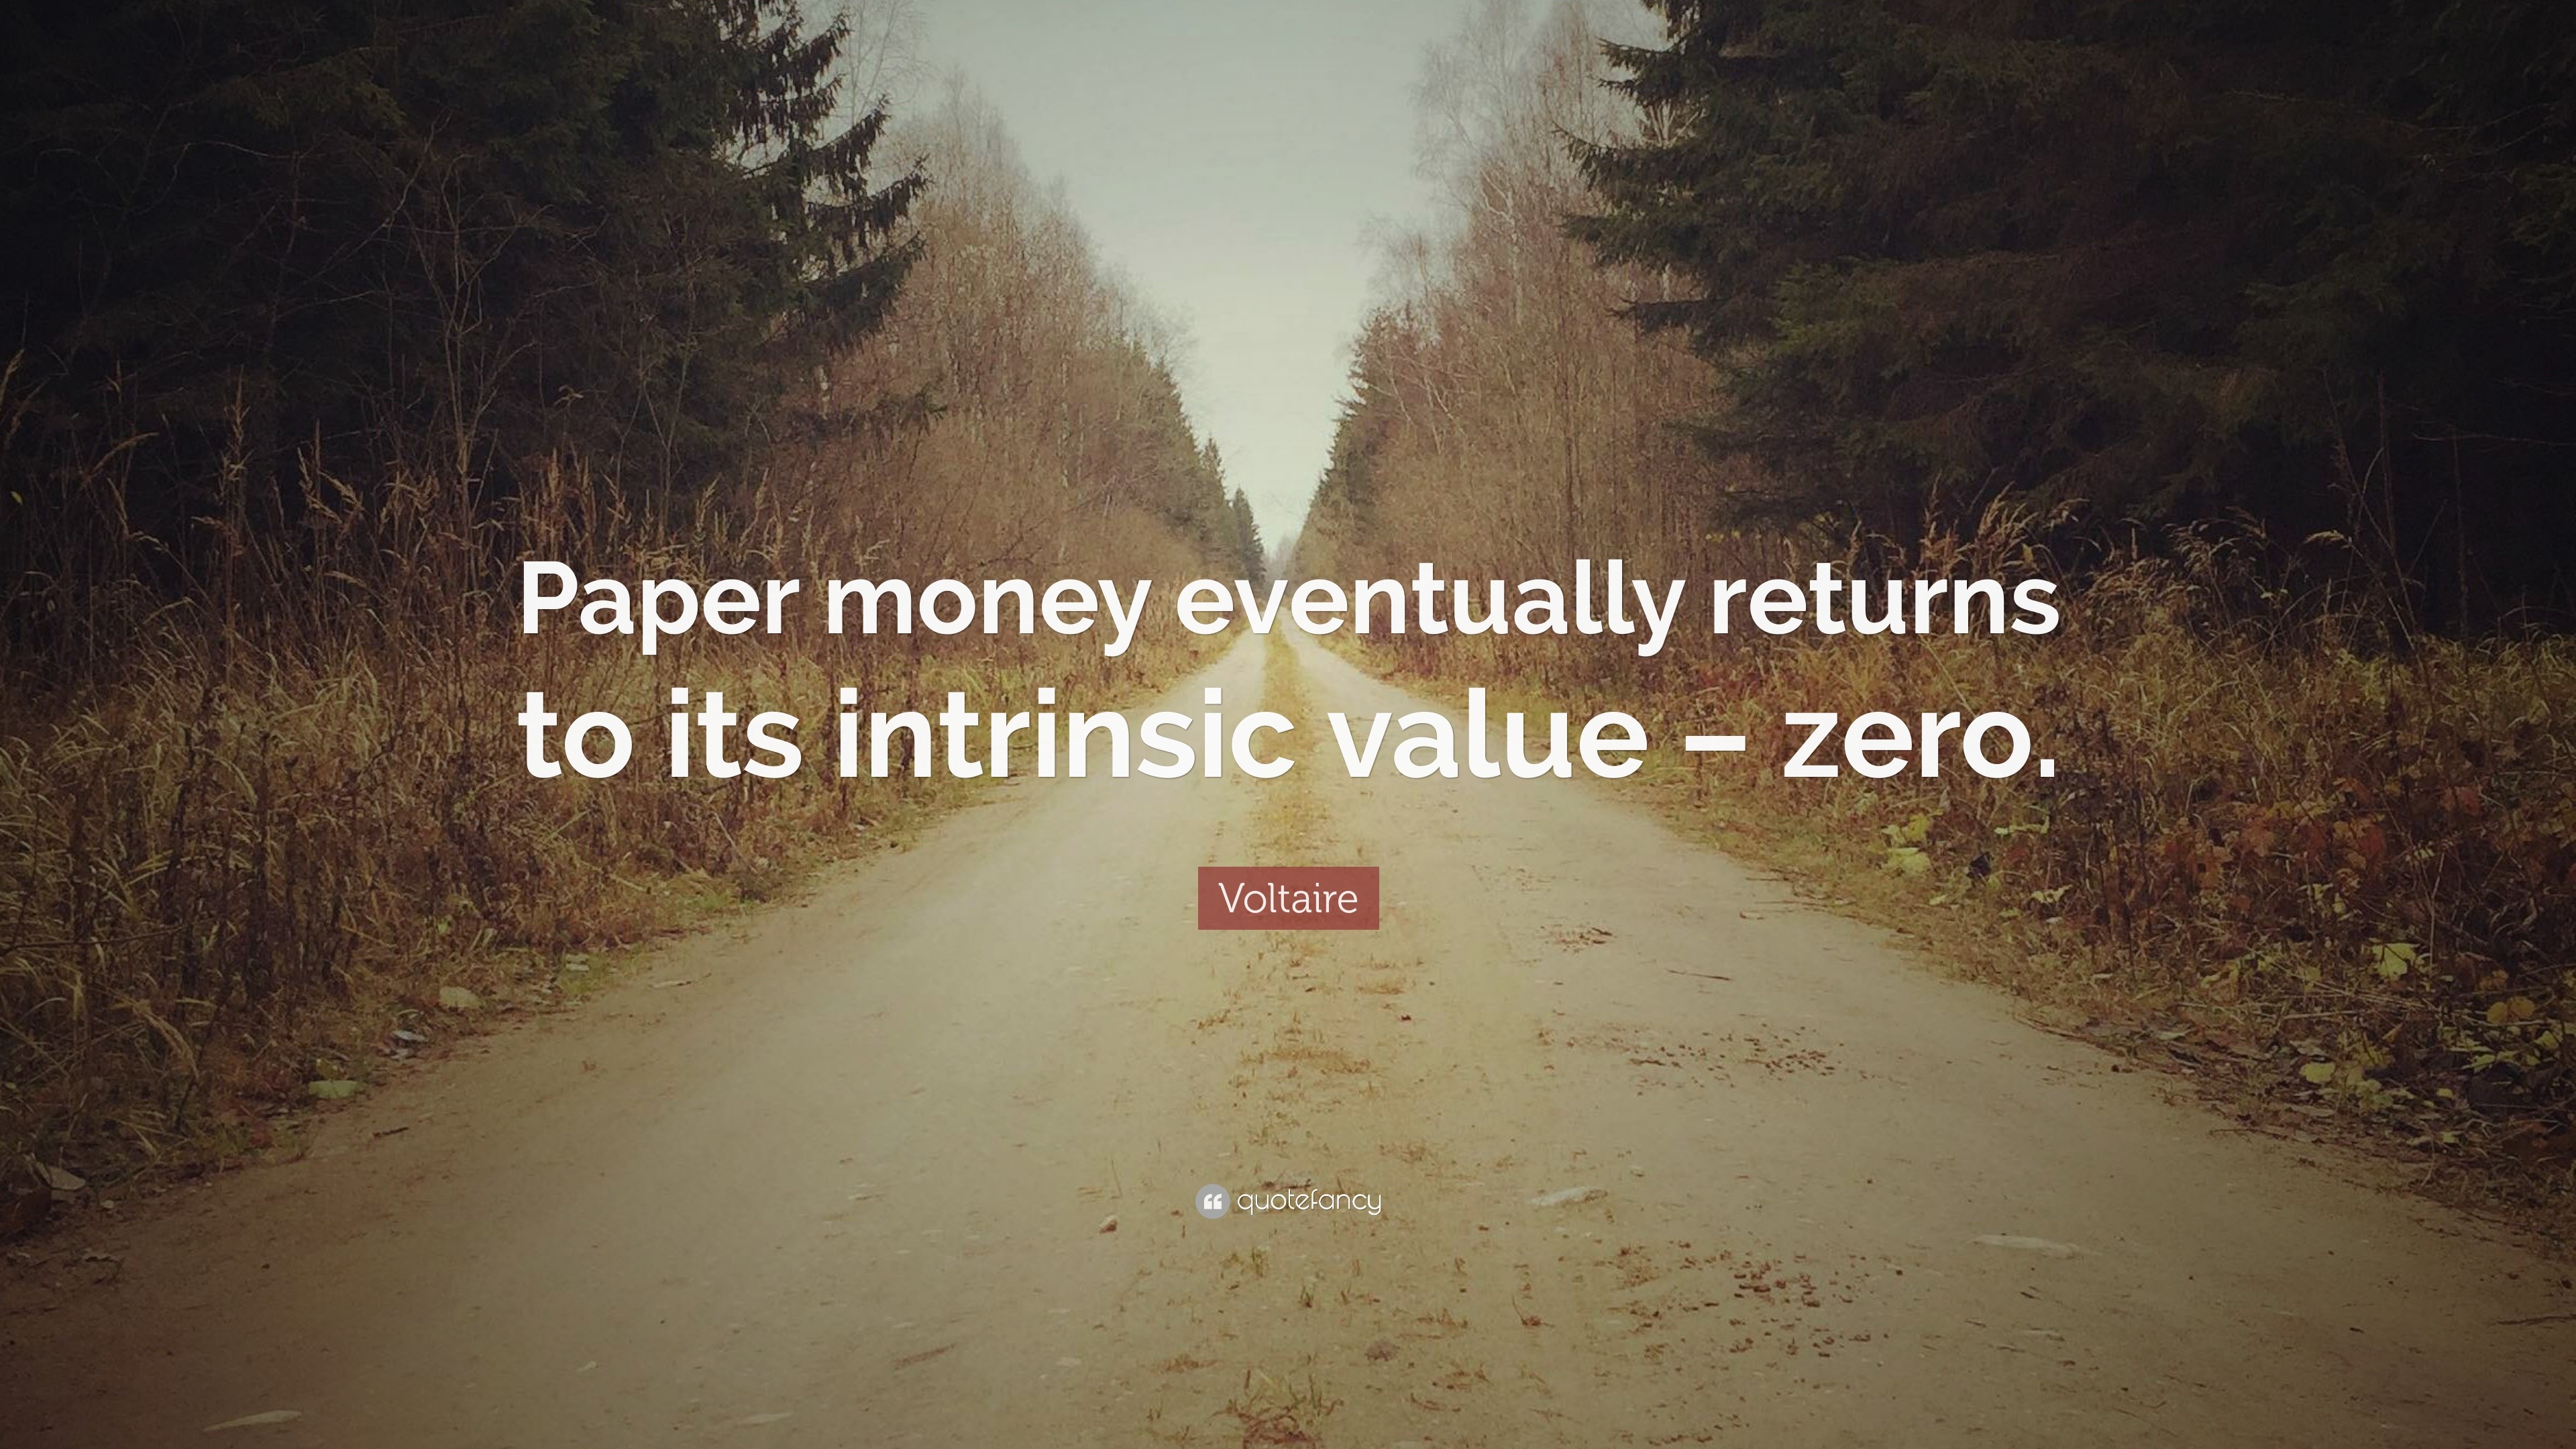 Voltaire Quote: “Paper money eventually returns to its intrinsic value